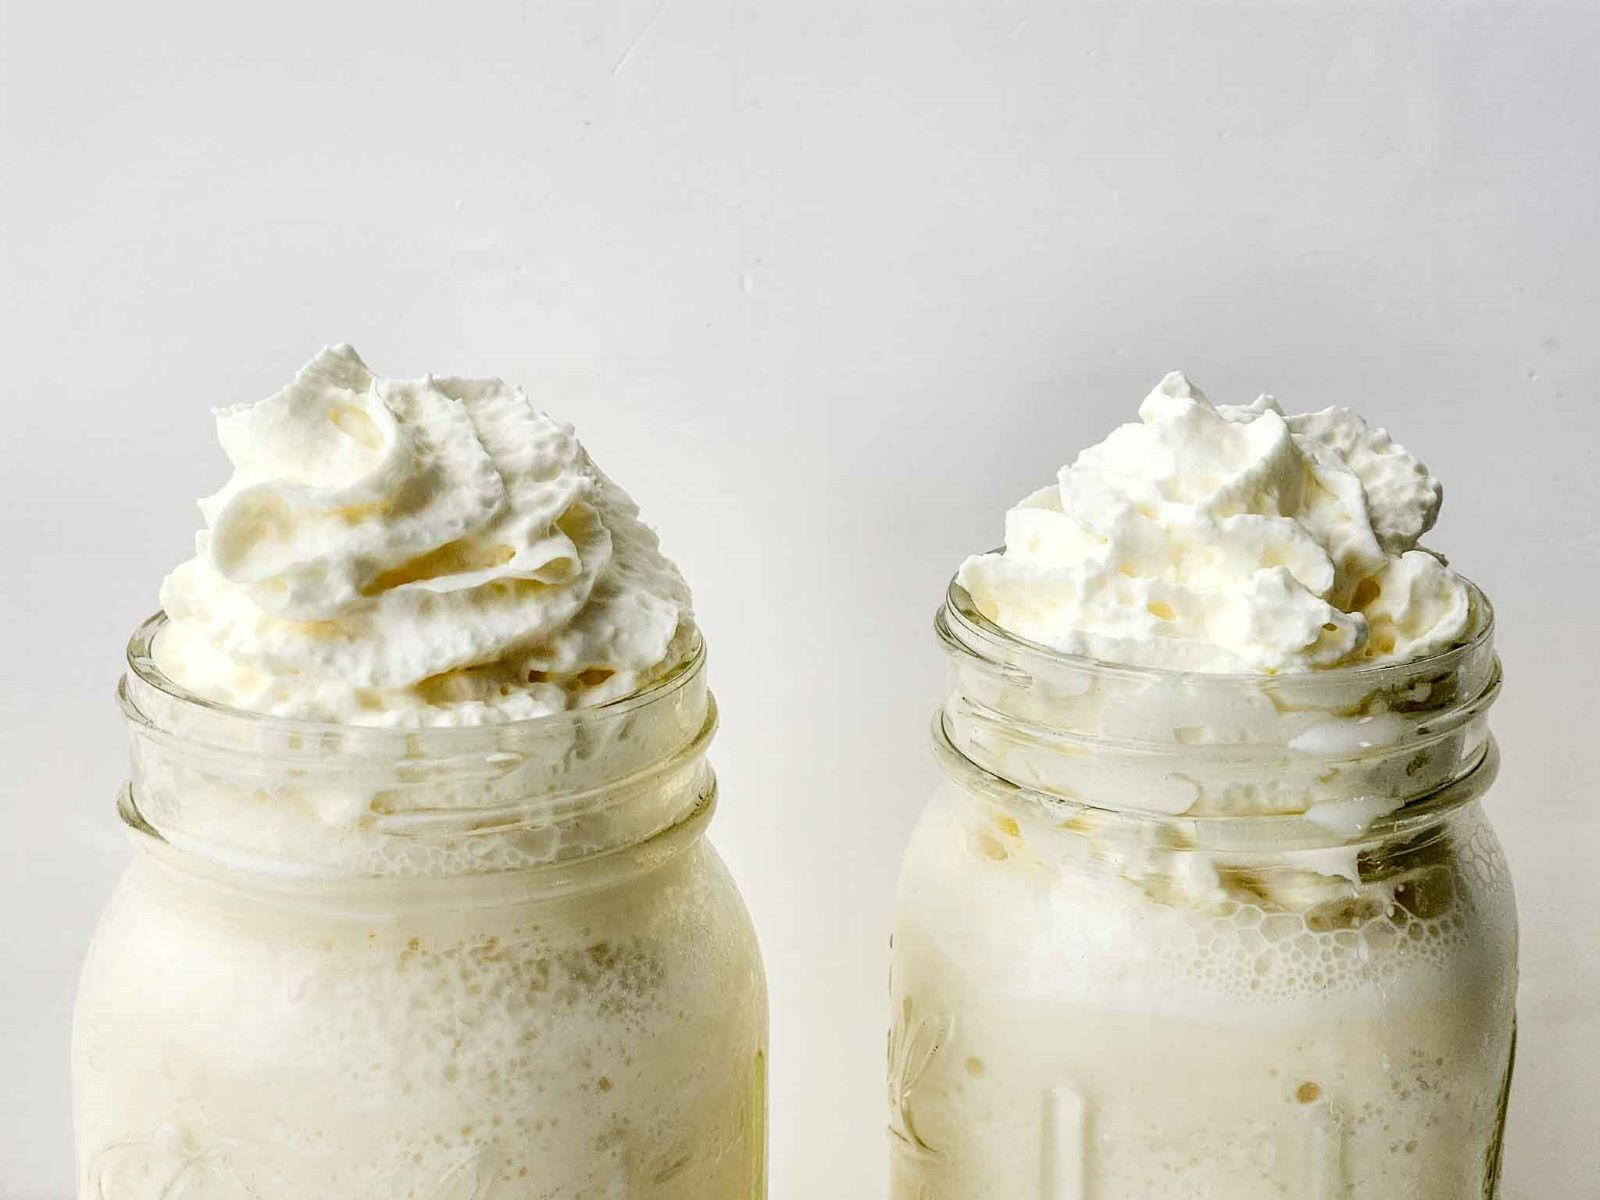 The Surprising Ingredient In The Vanilla Bean Frappuccino!